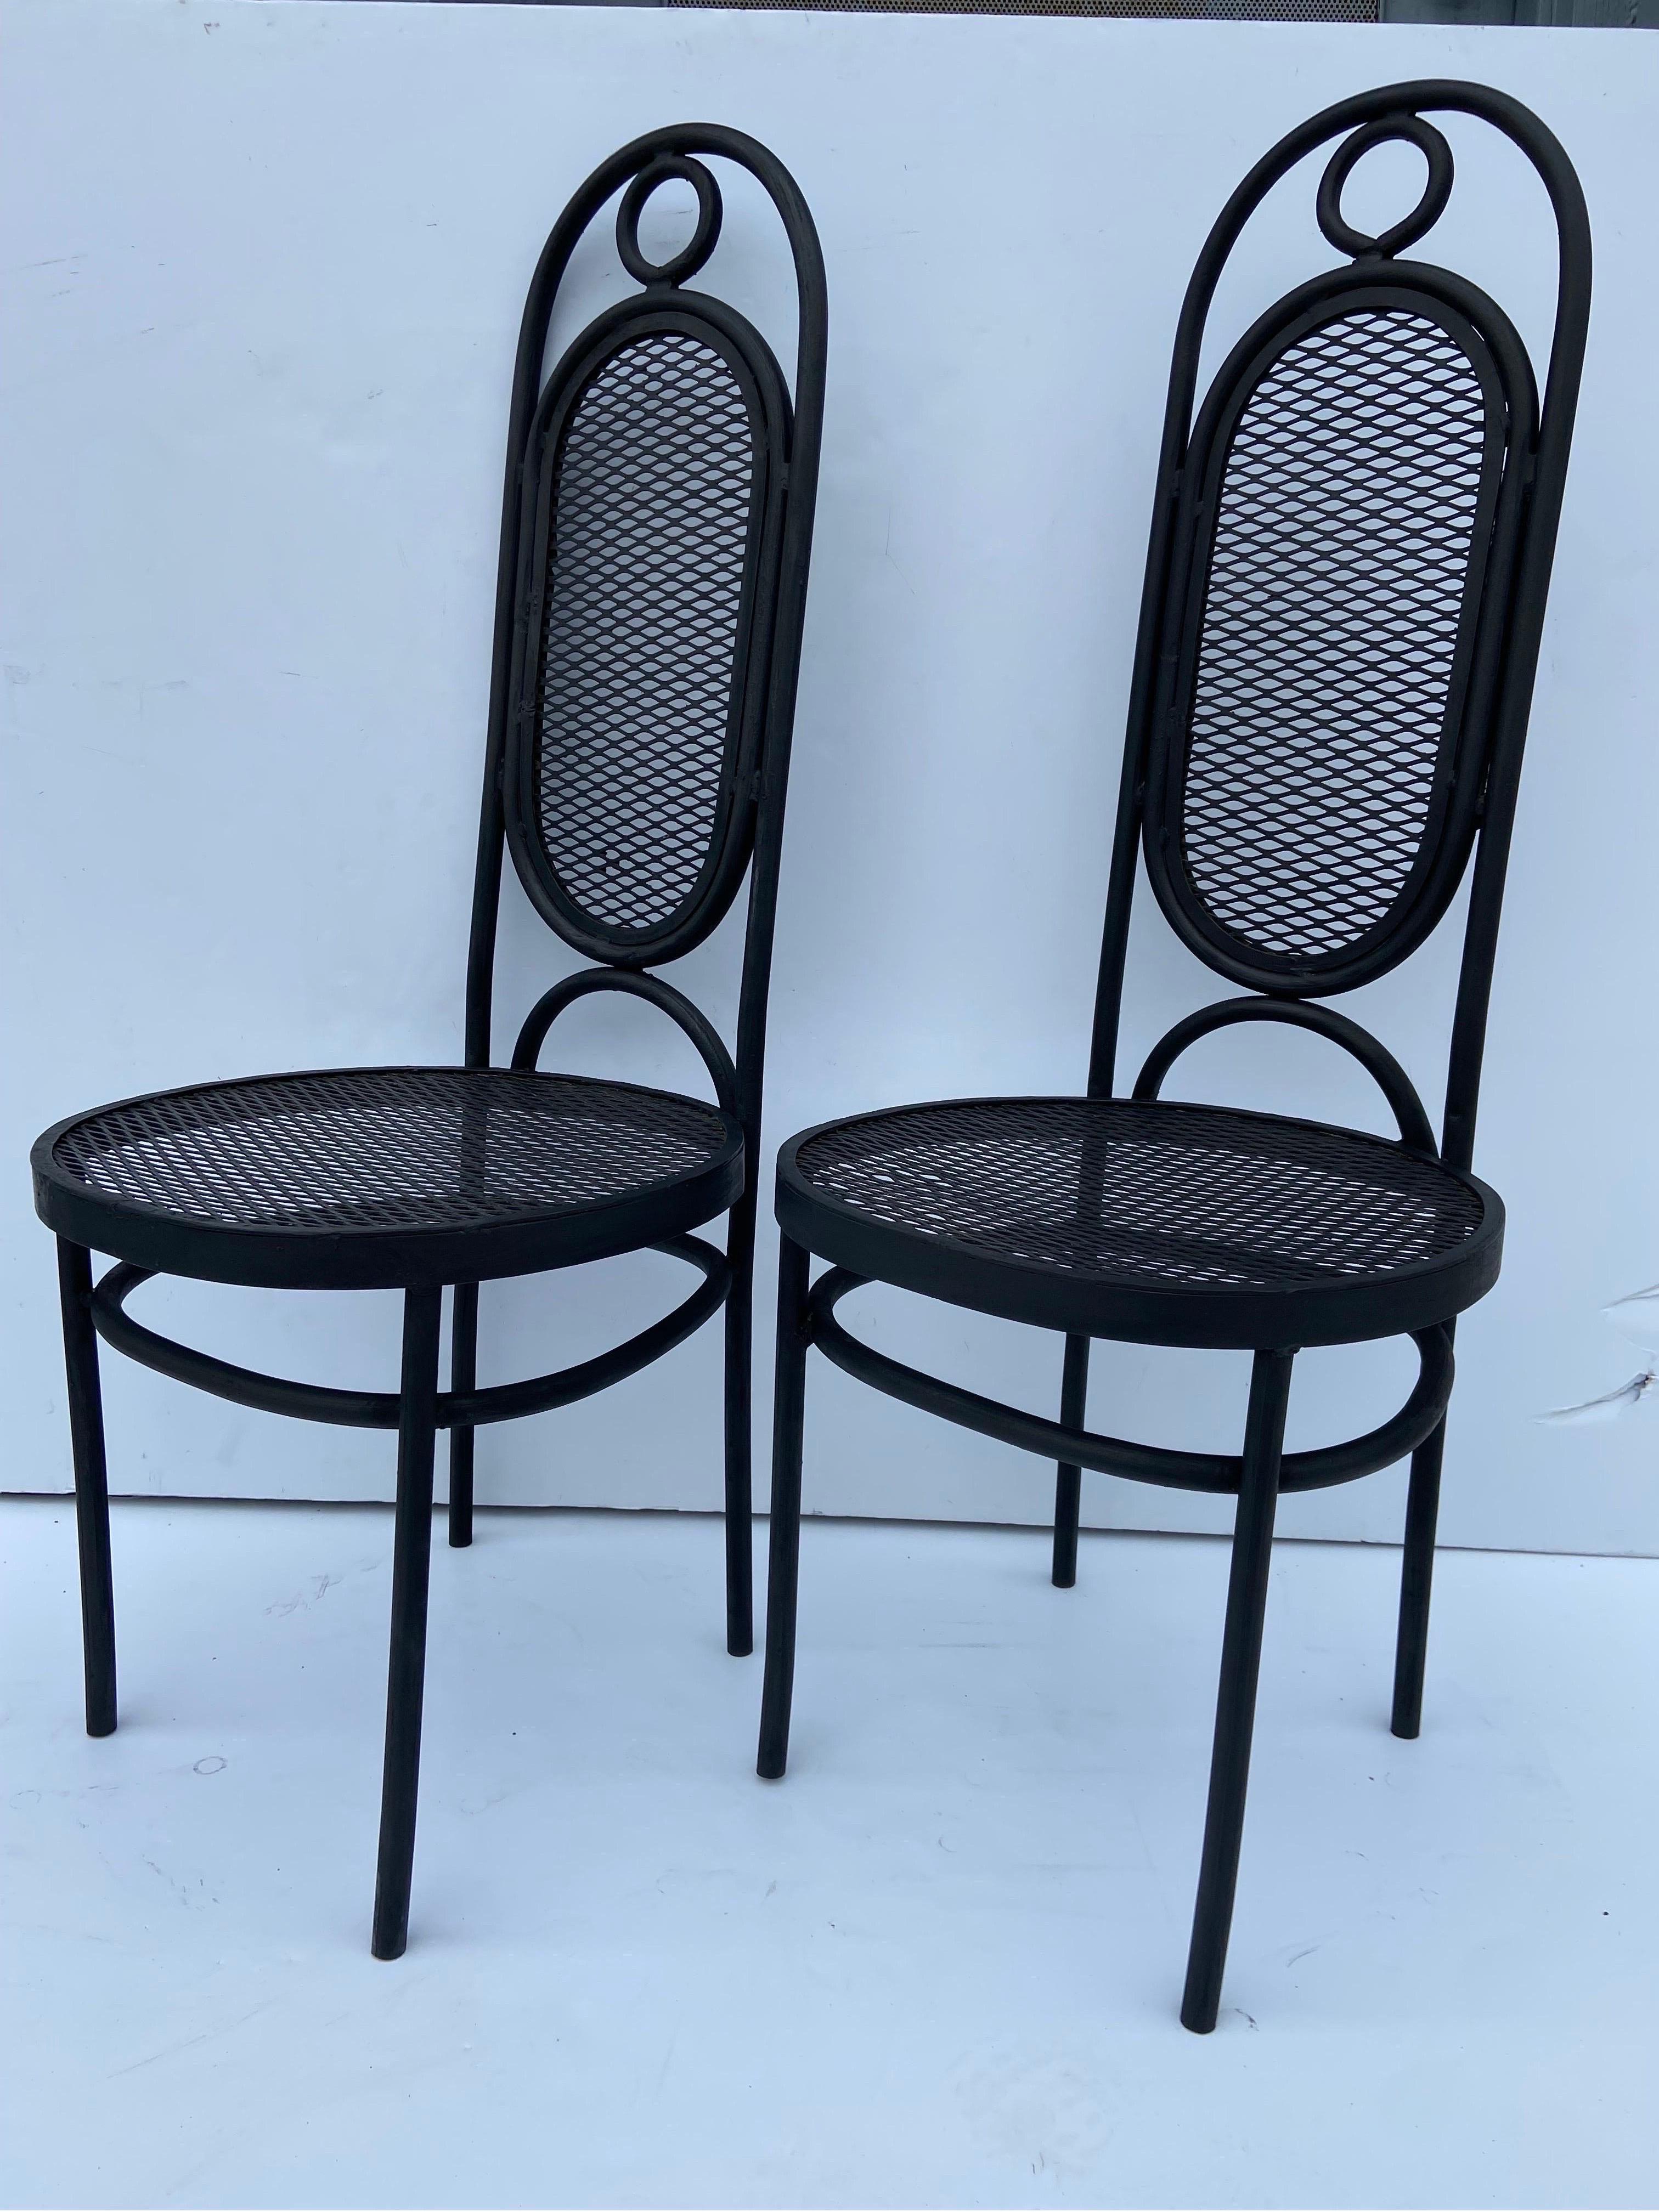 A vintage circa 1970's pair of Mexican iron garden or side chairs done in the style of the well known Model 17 chair designed by Michael Thonet and produced by Gebruder Thonet in the early 1860's. This pair of iron chairs, dates to circa 1970's,